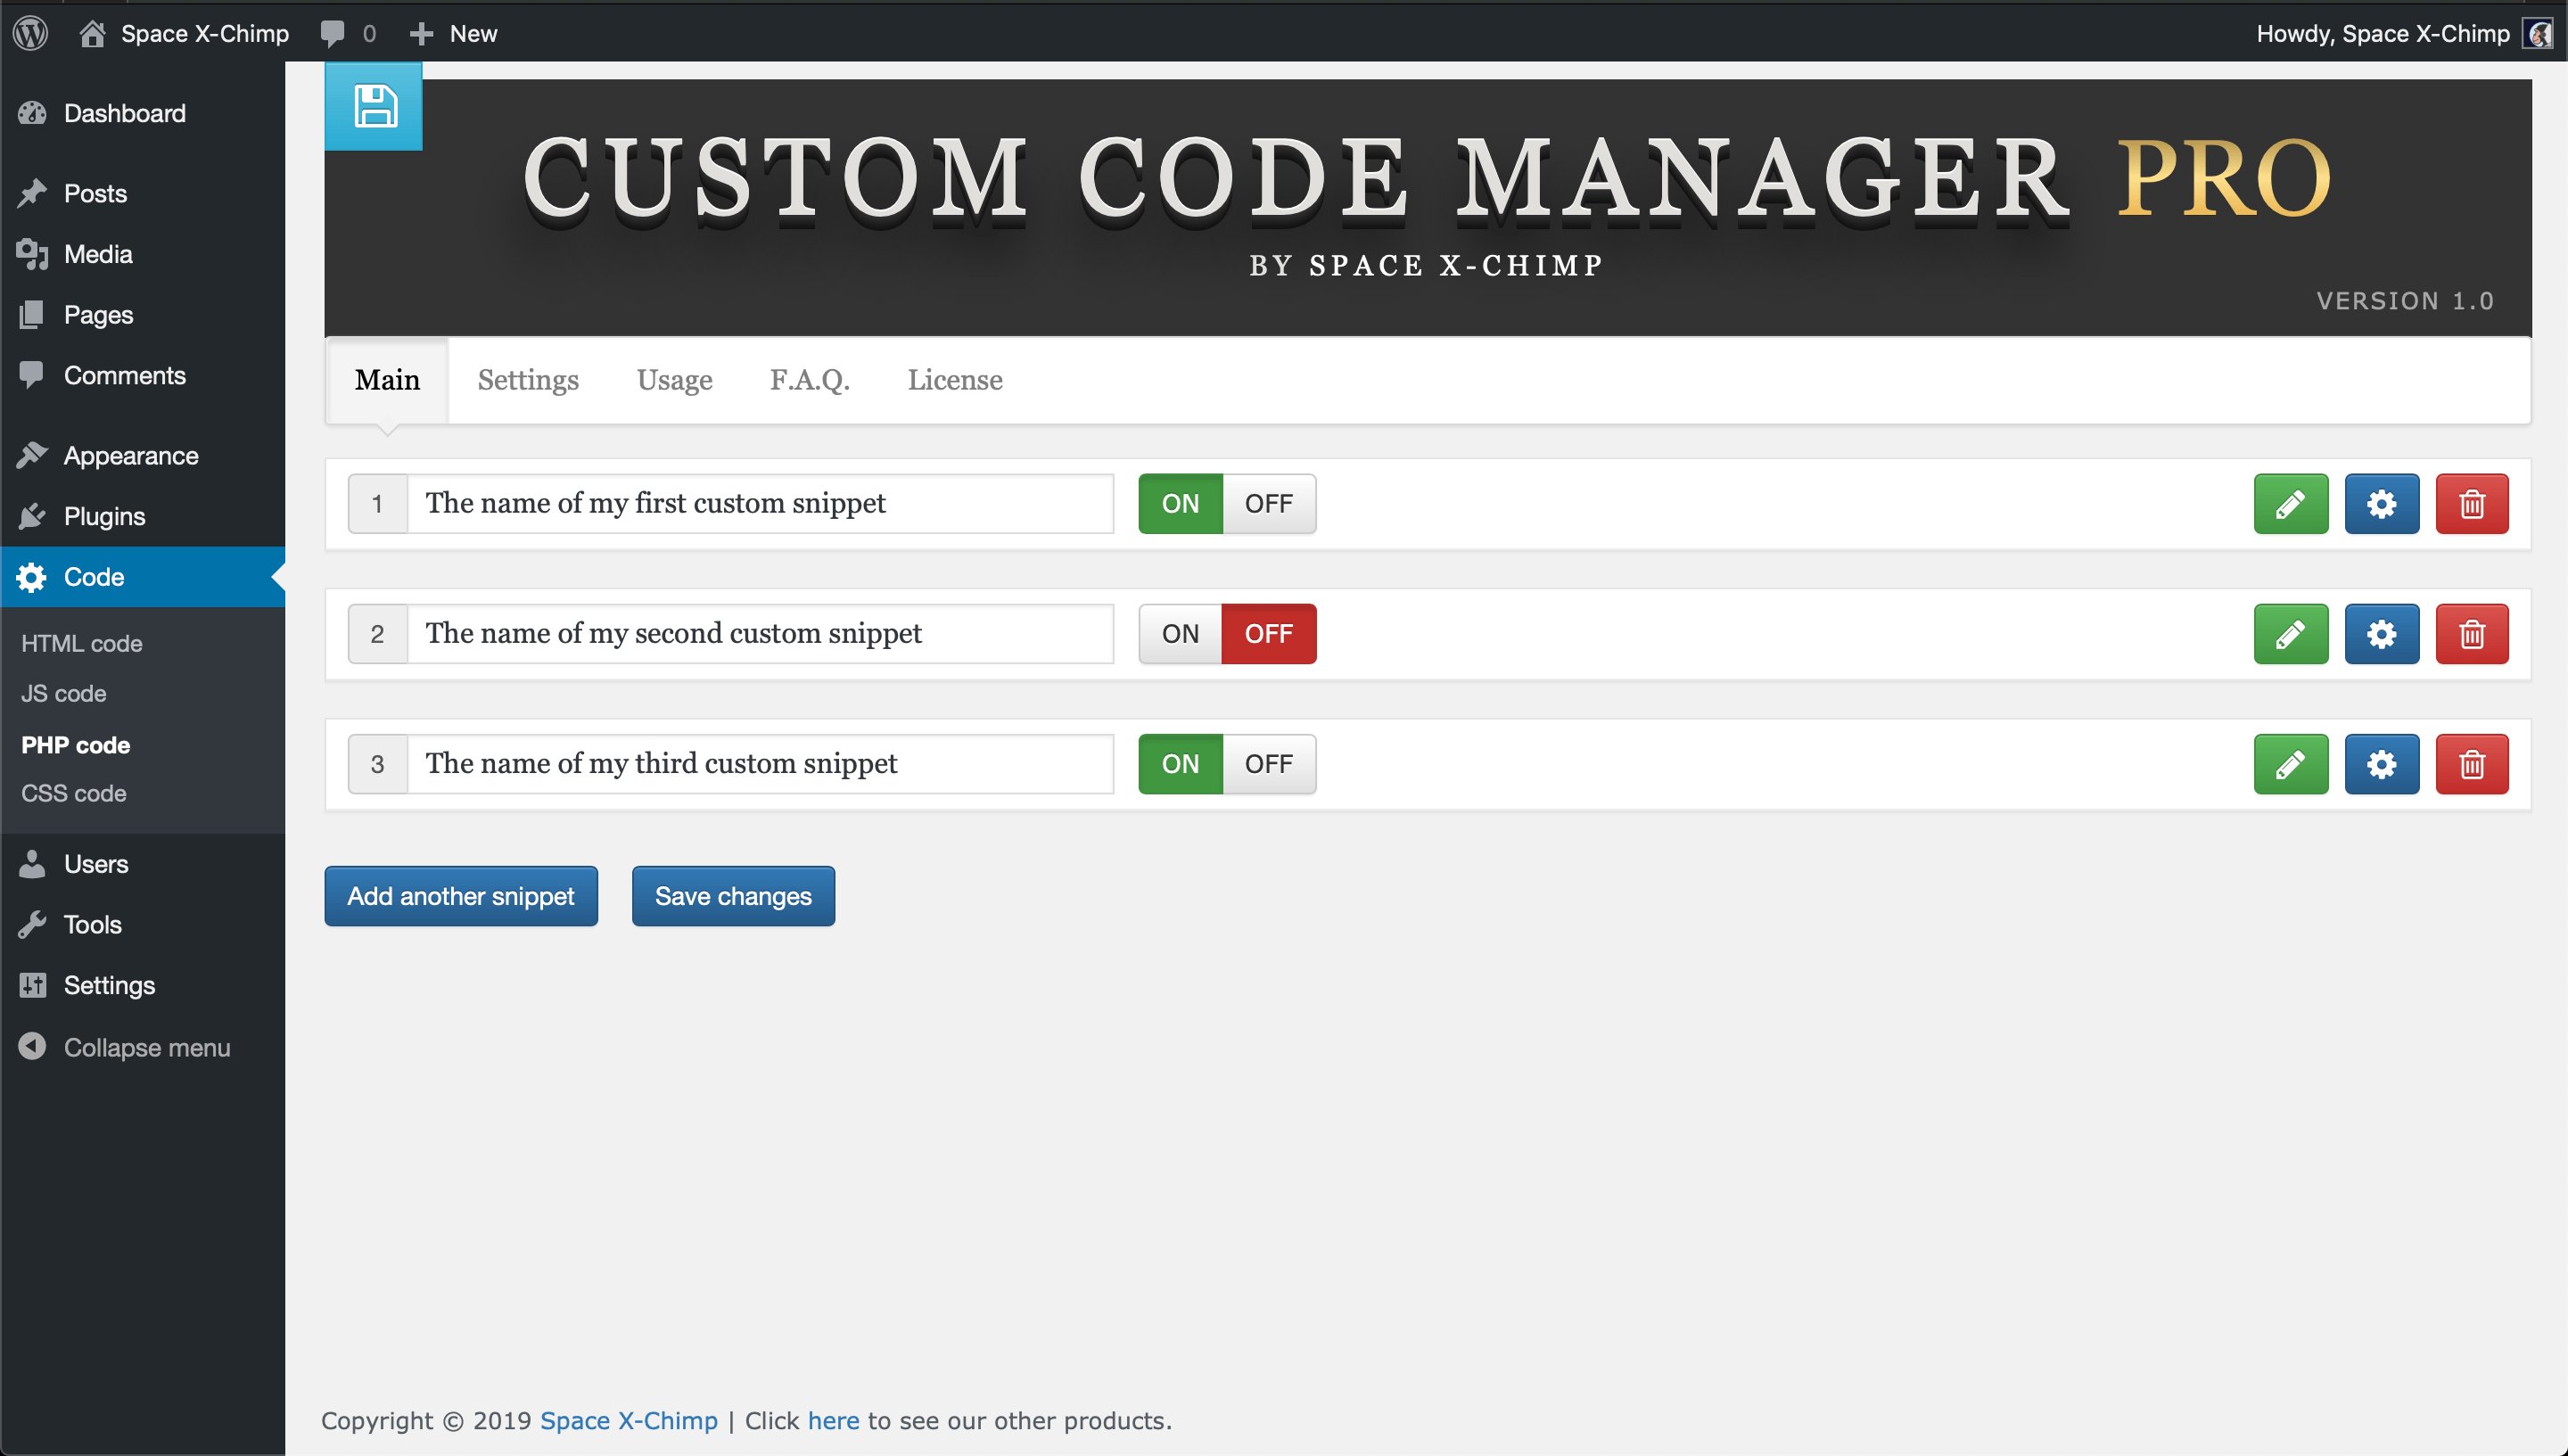 WP plugin "Custom Code Manager PRO" by Space X-Chimp